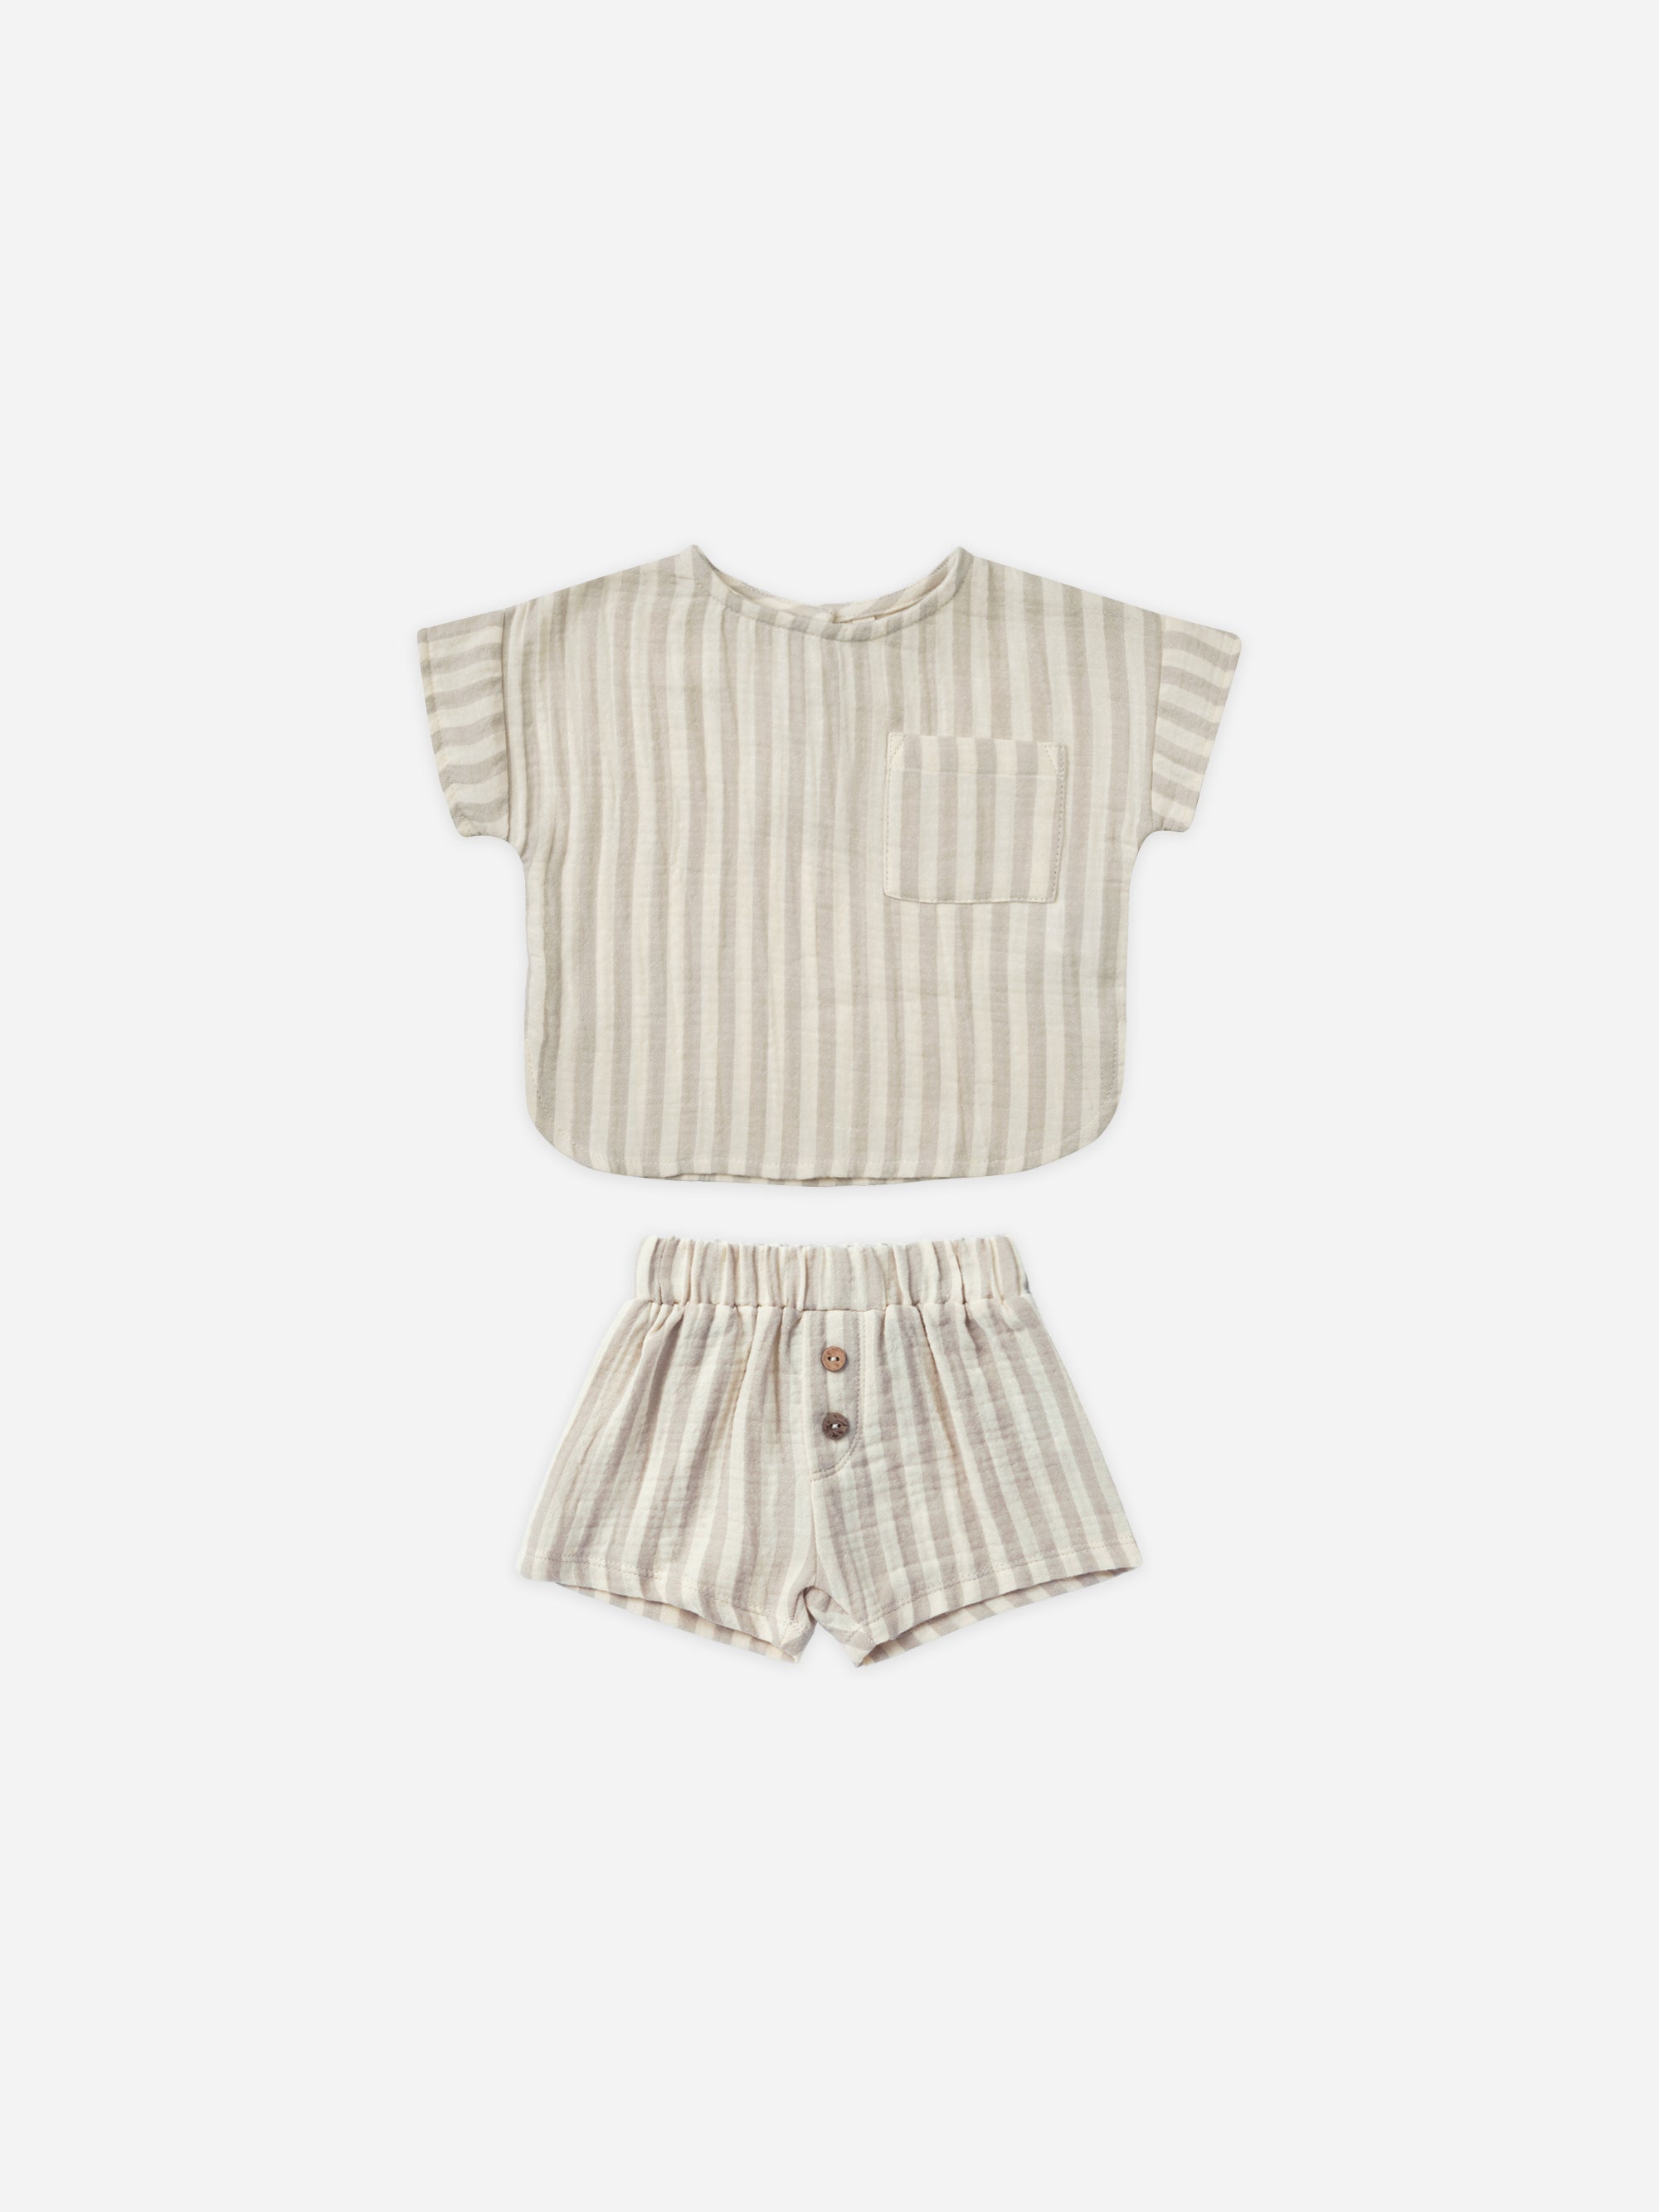 Woven Boxy Top + Short Set || Ash Stripe - Rylee + Cru | Kids Clothes | Trendy Baby Clothes | Modern Infant Outfits |